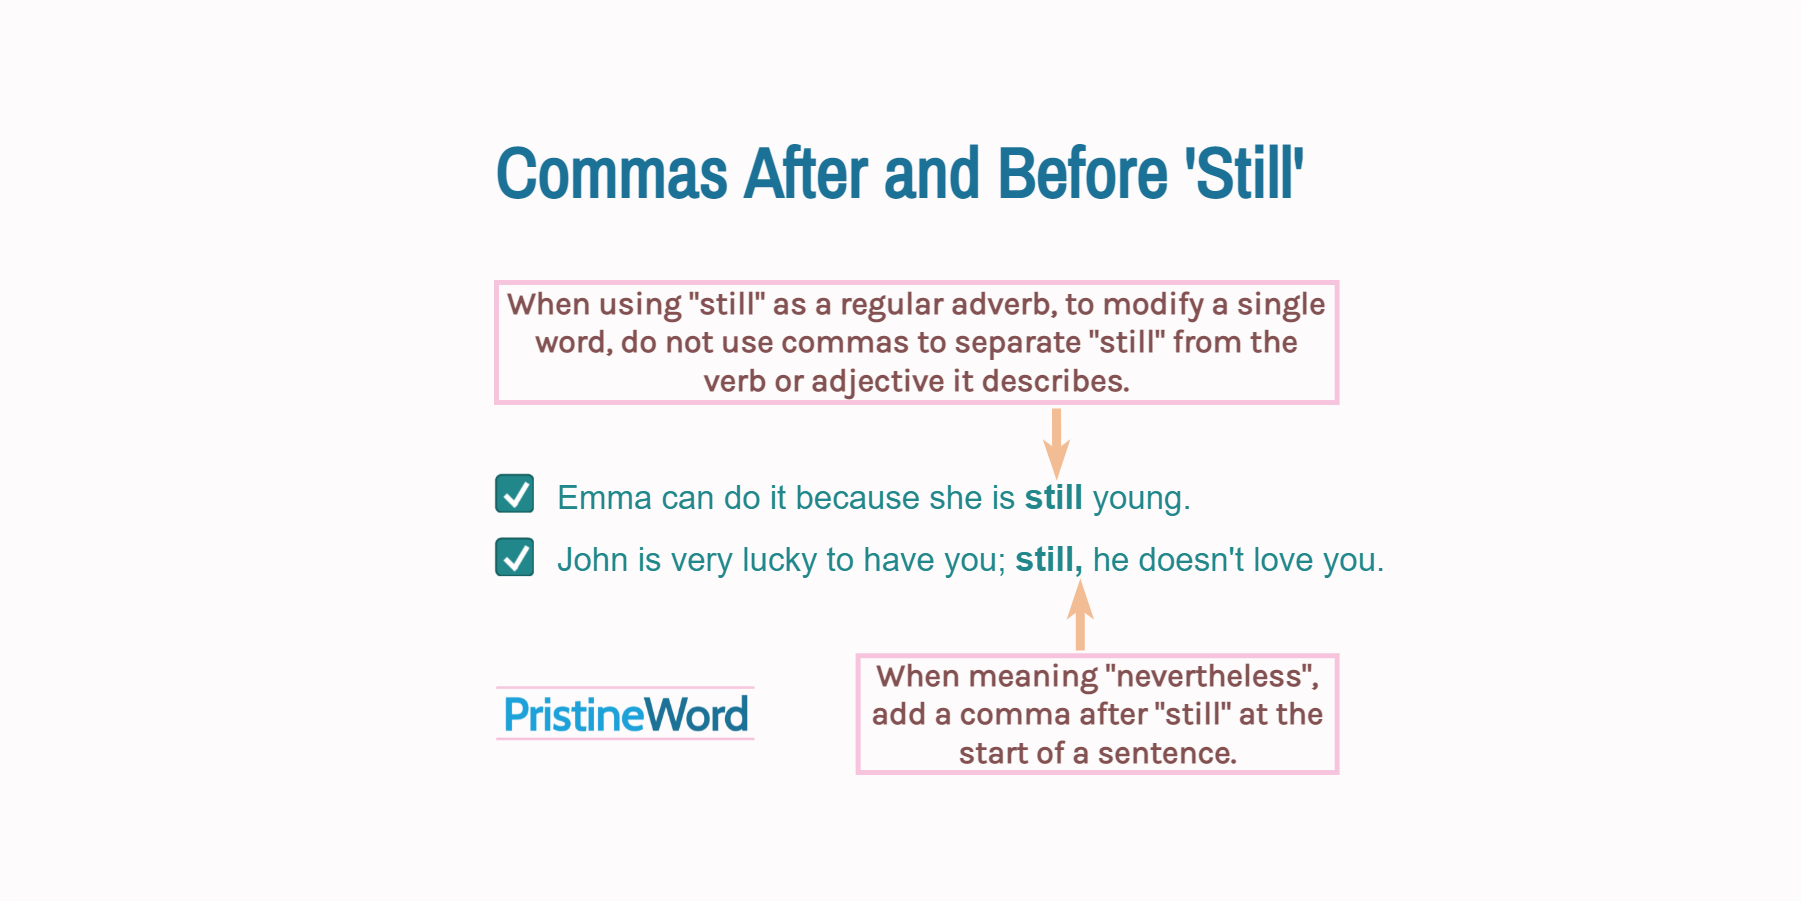 Commas Before and After 'Still'